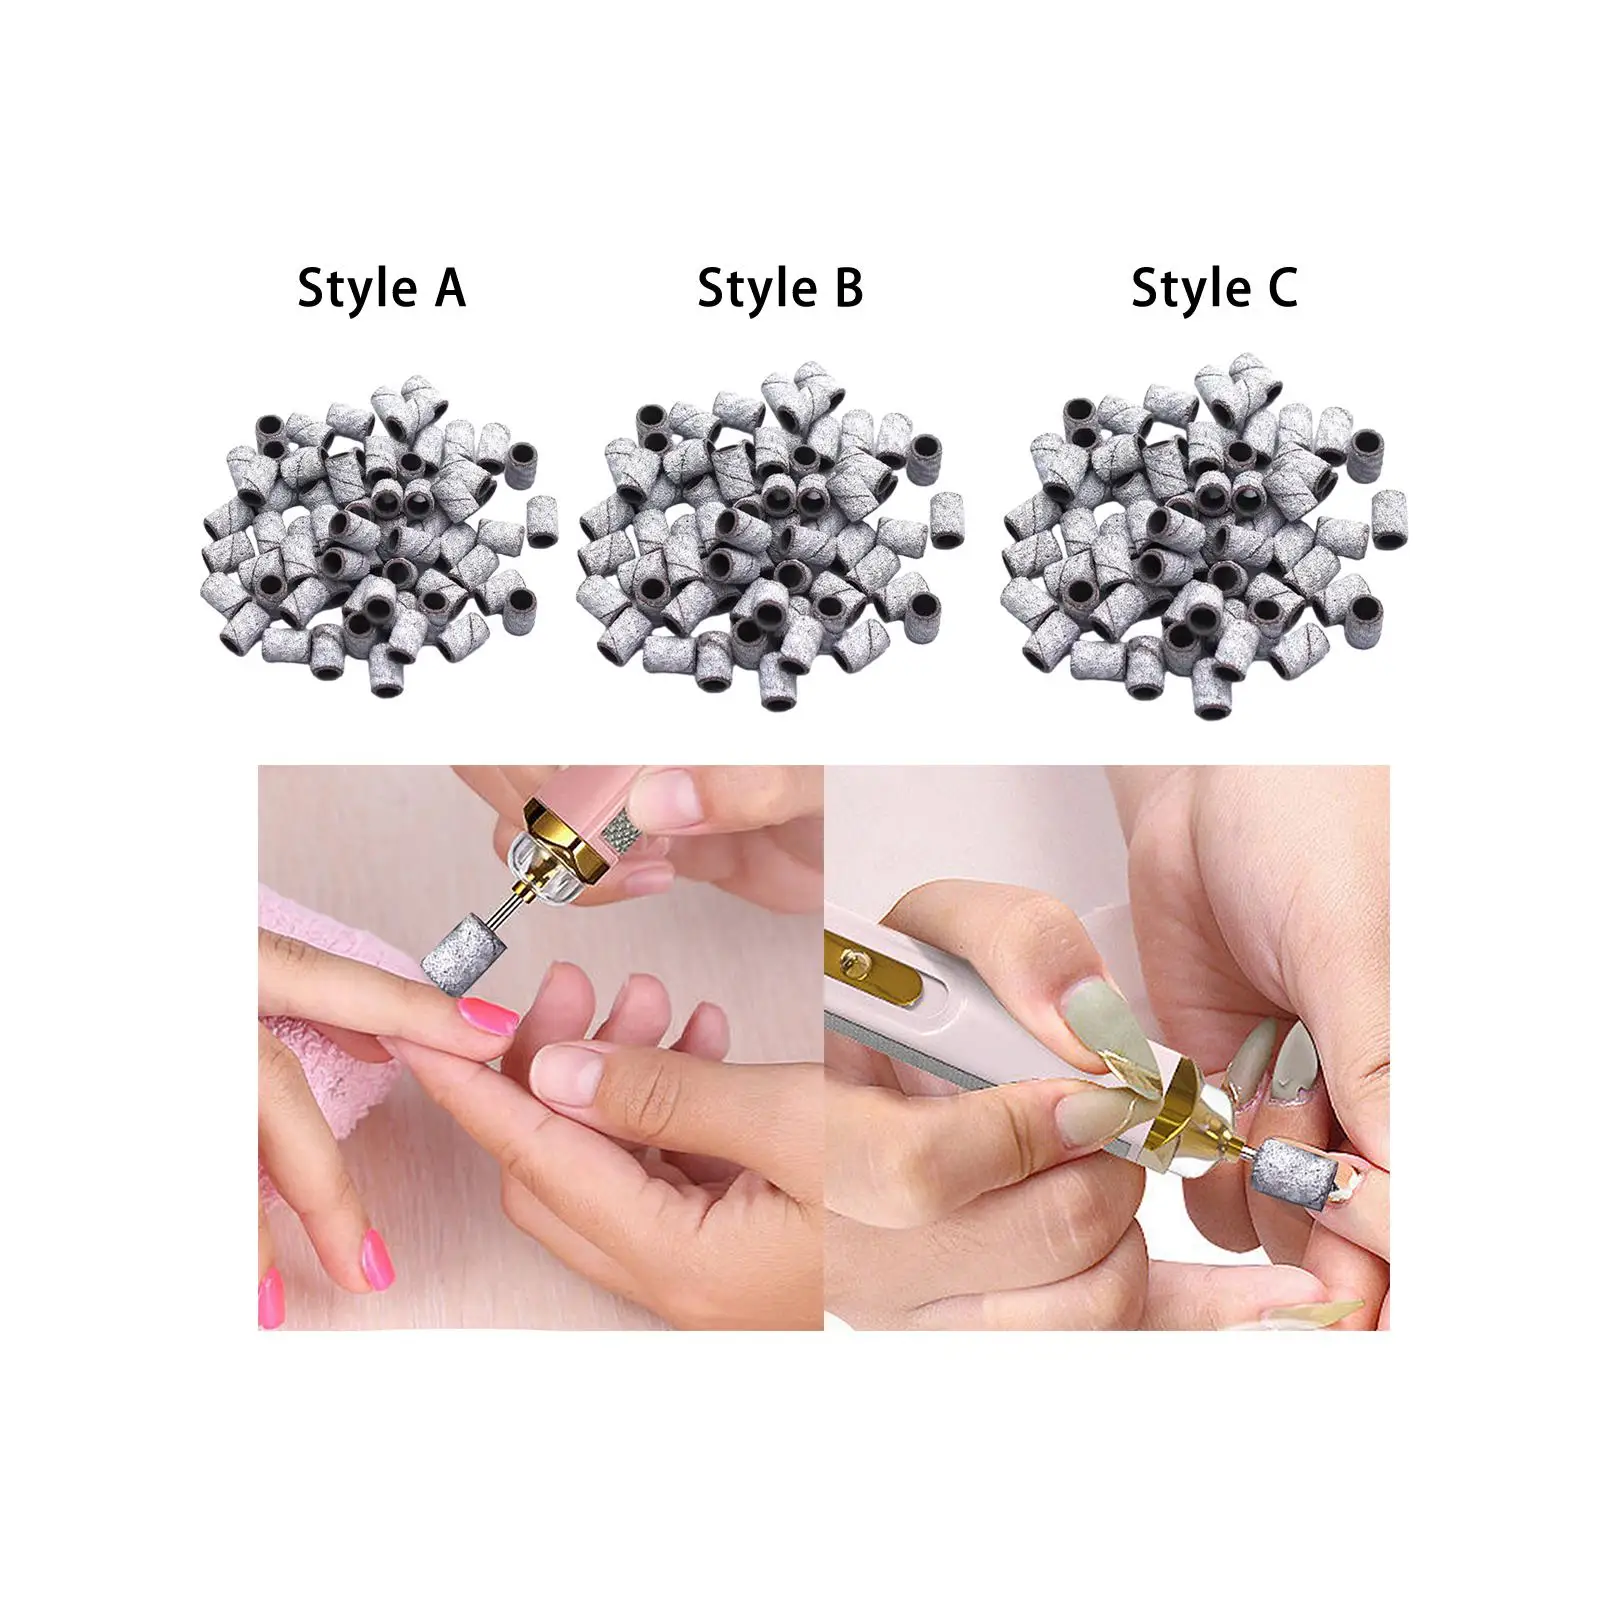 100 Pieces Nail Art Sanding Bands Polisher Essential Supplies Manicure Tool Accessorie Pedicure Tool Durable Polishing Nails